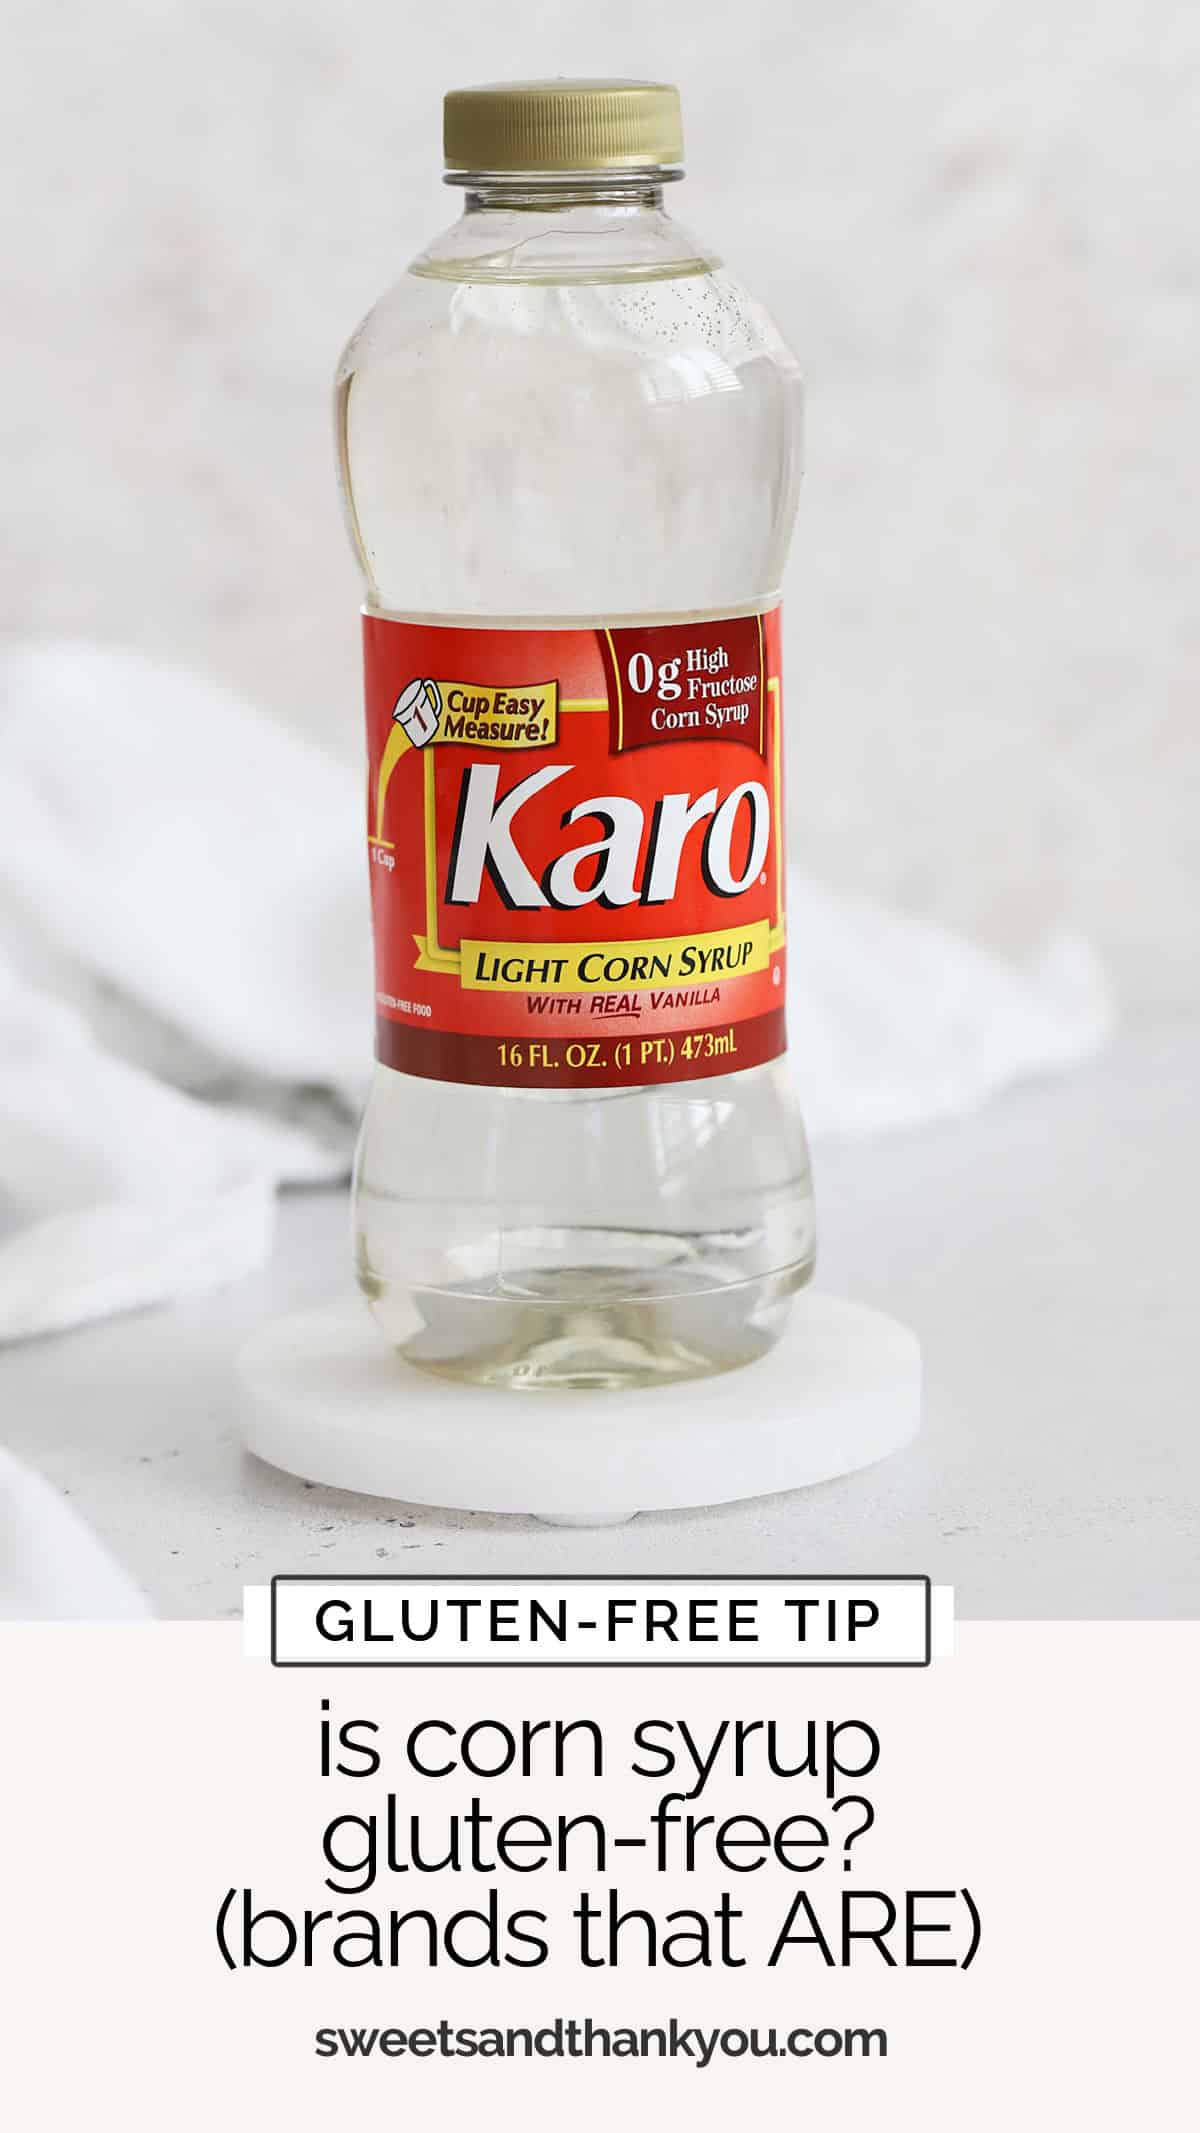 Wondering if corn syrup is gluten-free? What about Karo syrup? Get the scoop on which varieties are safe to eat, what to watch out for & more! / is karo syrup gluten free / is high fructose corn syrup gluten free / types of corn syrup / light corn syrup vs dark corn syrup / corn syrup in baking / best substitute for corn syrup in baking / is karo corn syrup gluten free / gluten free baking tips / gluten free tips